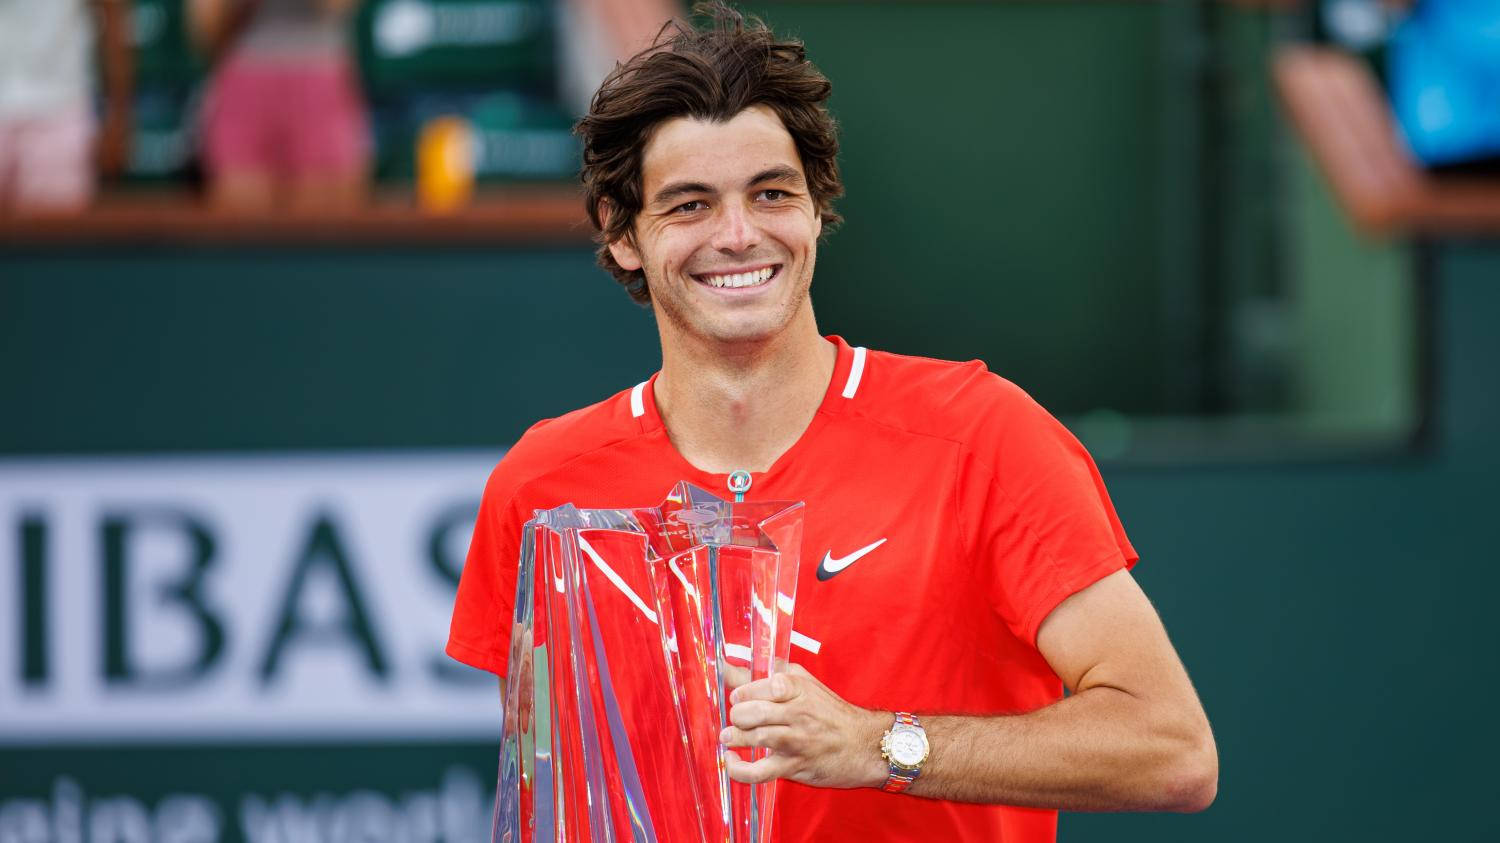 Professional Tennis Player Taylor Fritz Lifting The Tennis Tournament Trophy Background